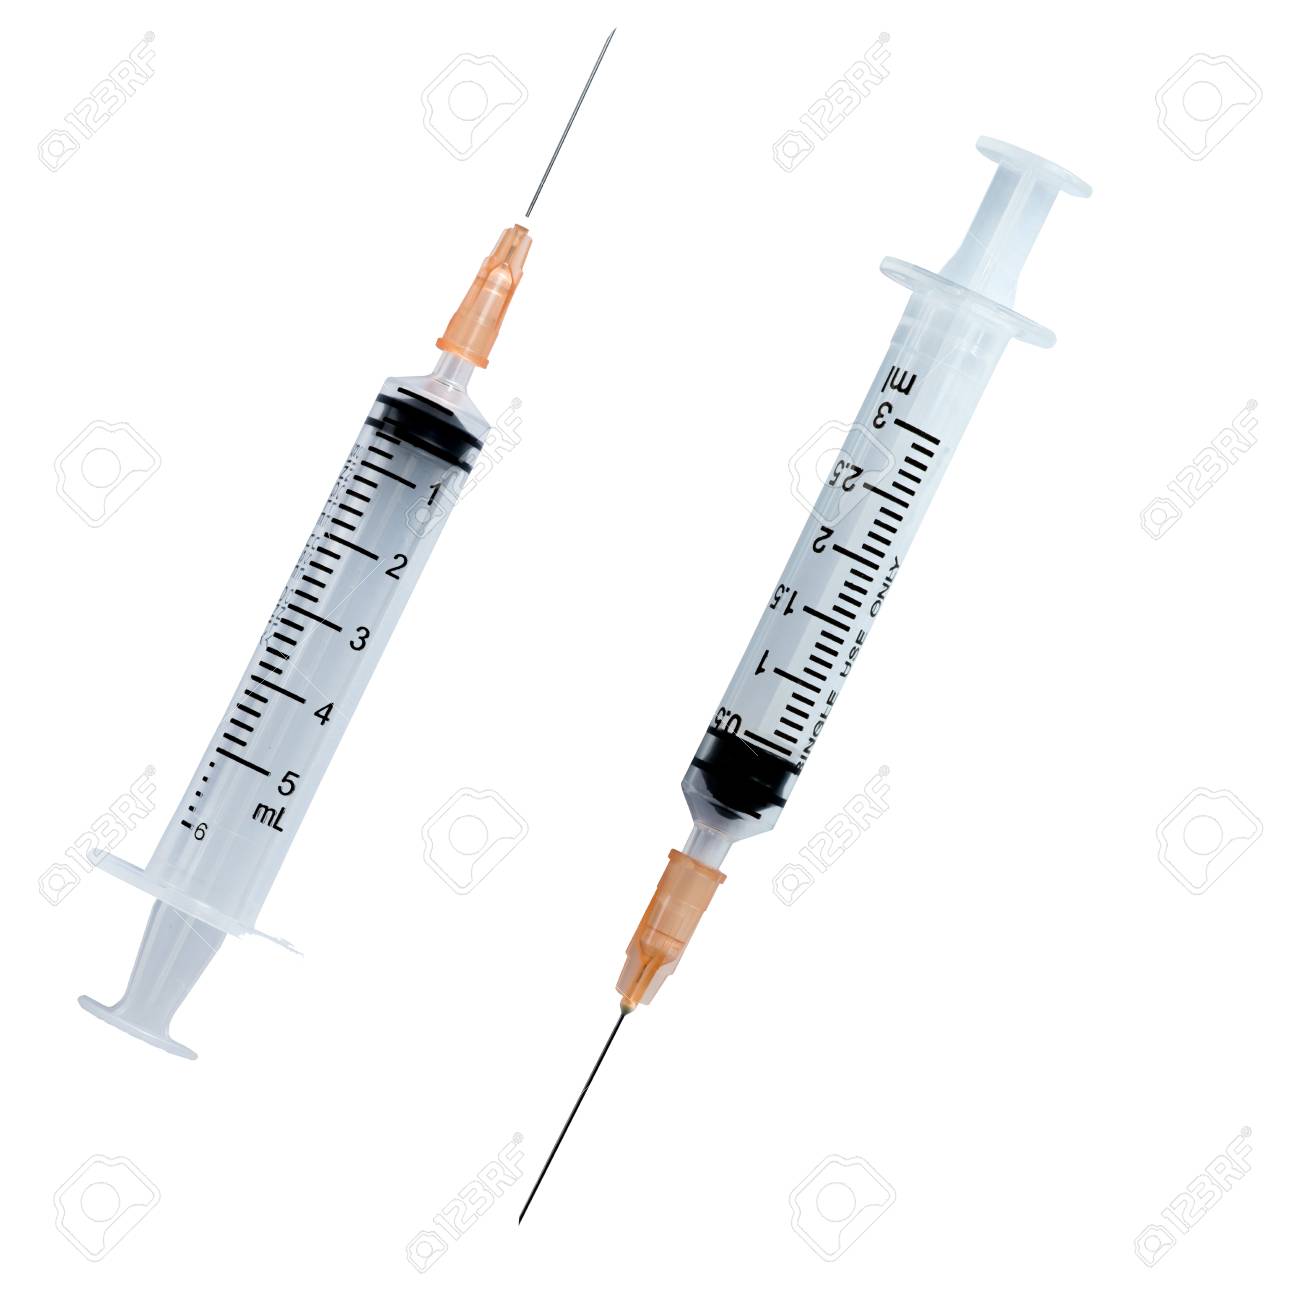 Hypodermic Needle Injection On White Background Stock